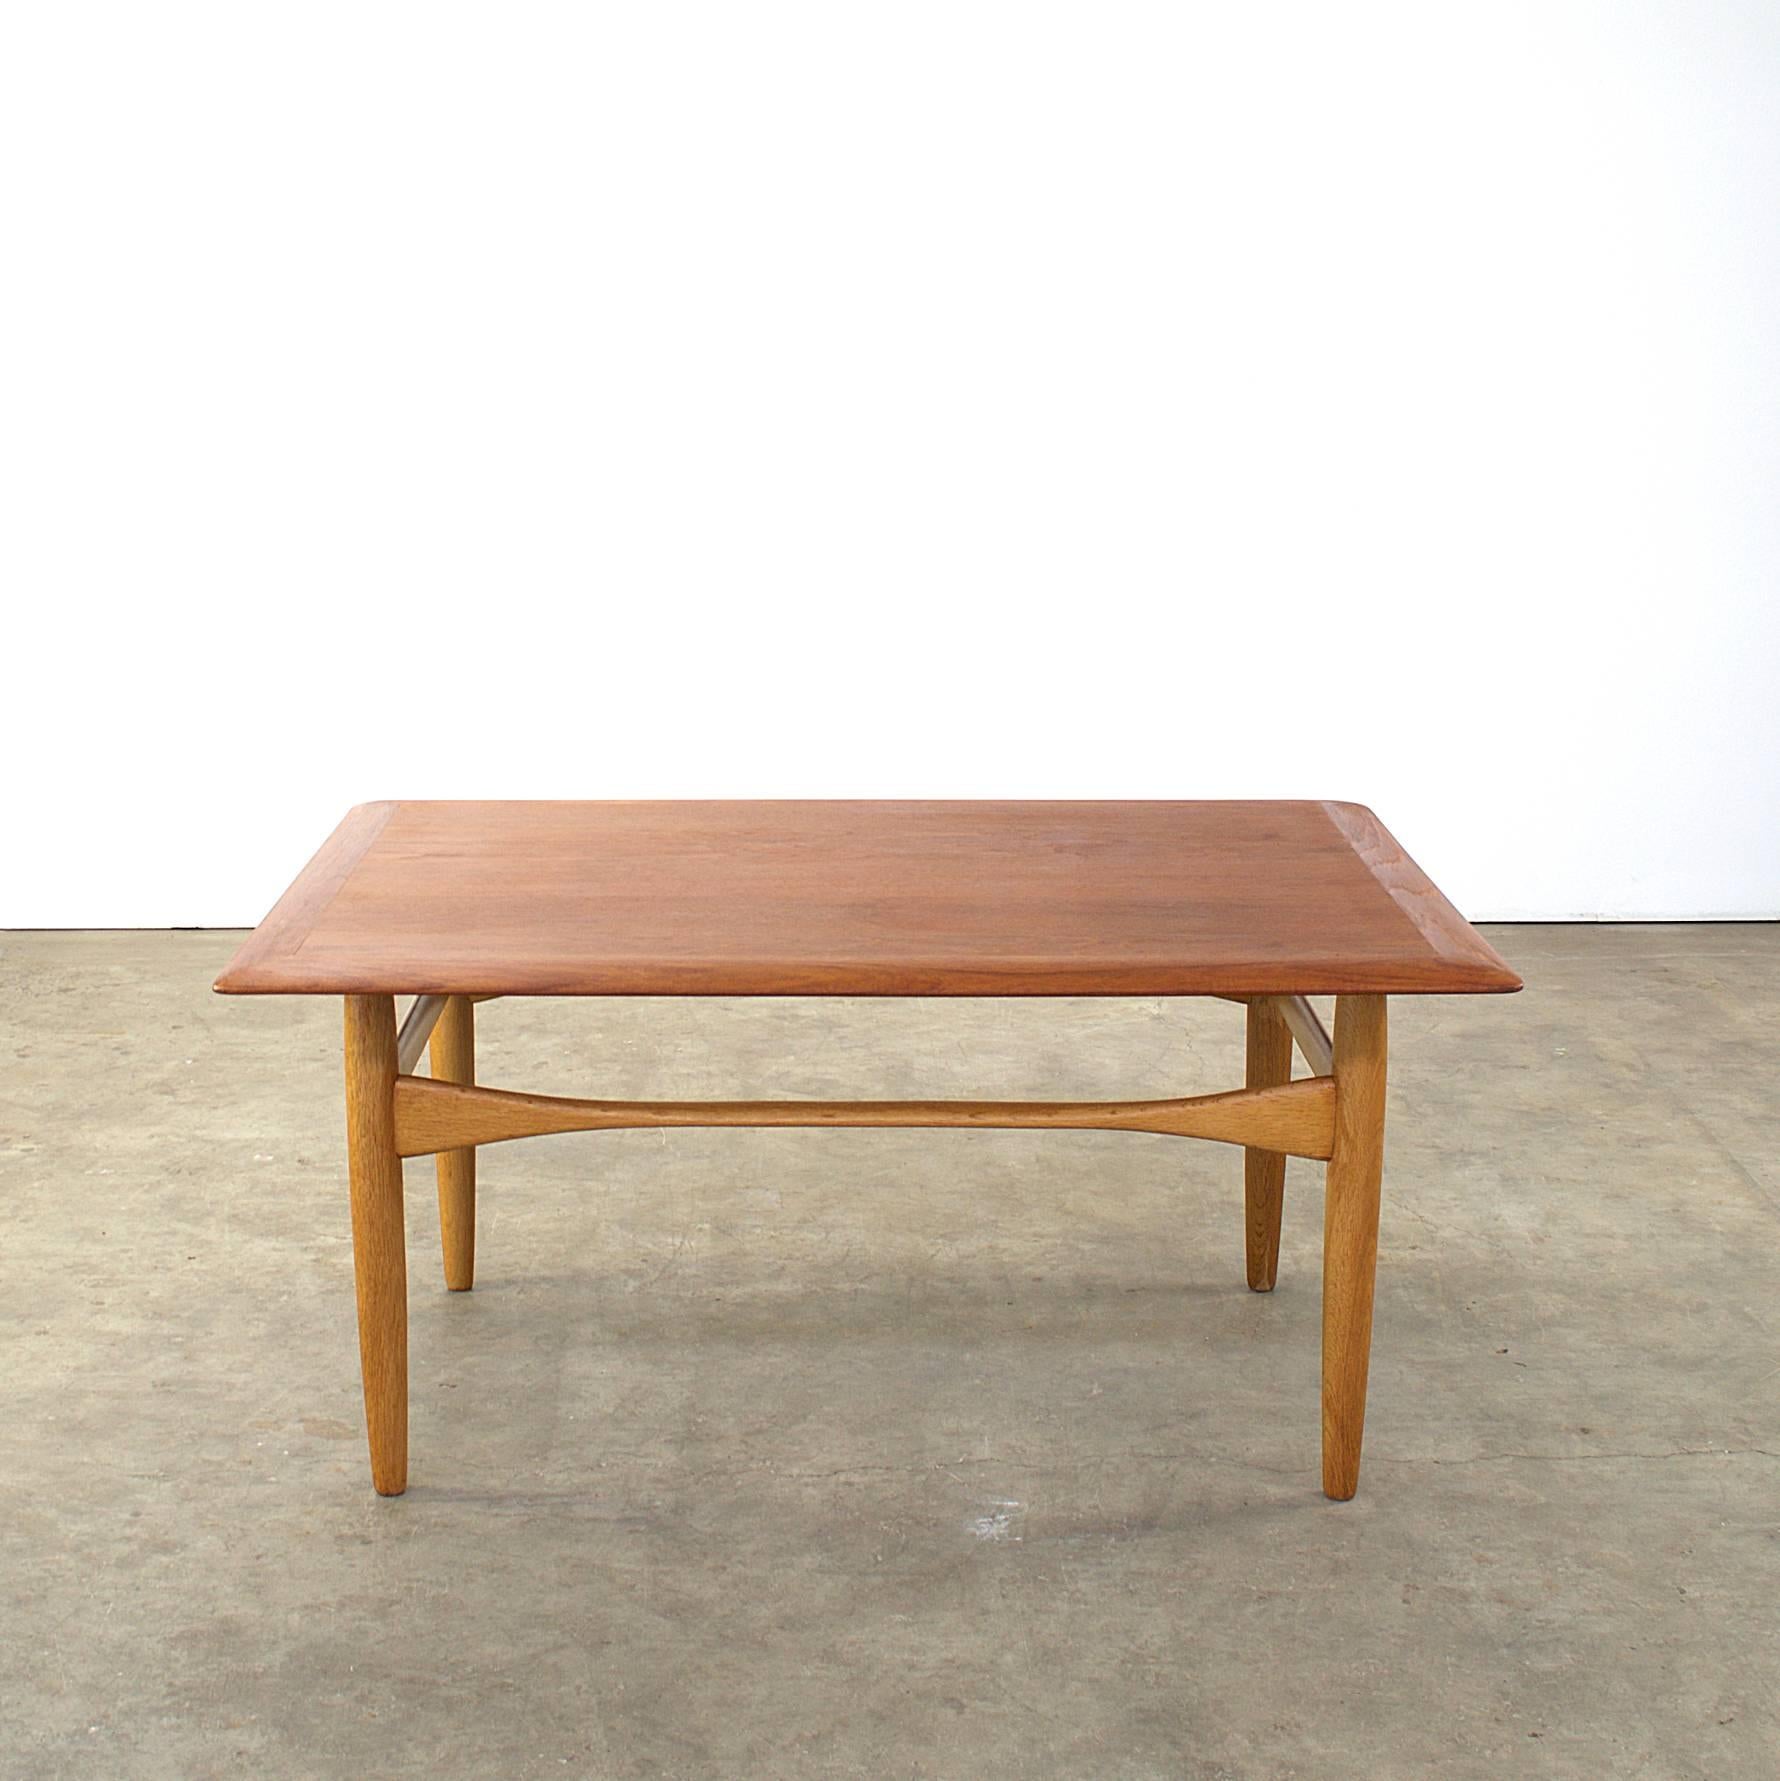 1960s Aksel Bender Madsen coffee table for Bovenkamp. Teak table top, oak feet. Good condition, wear consistent with age and use.